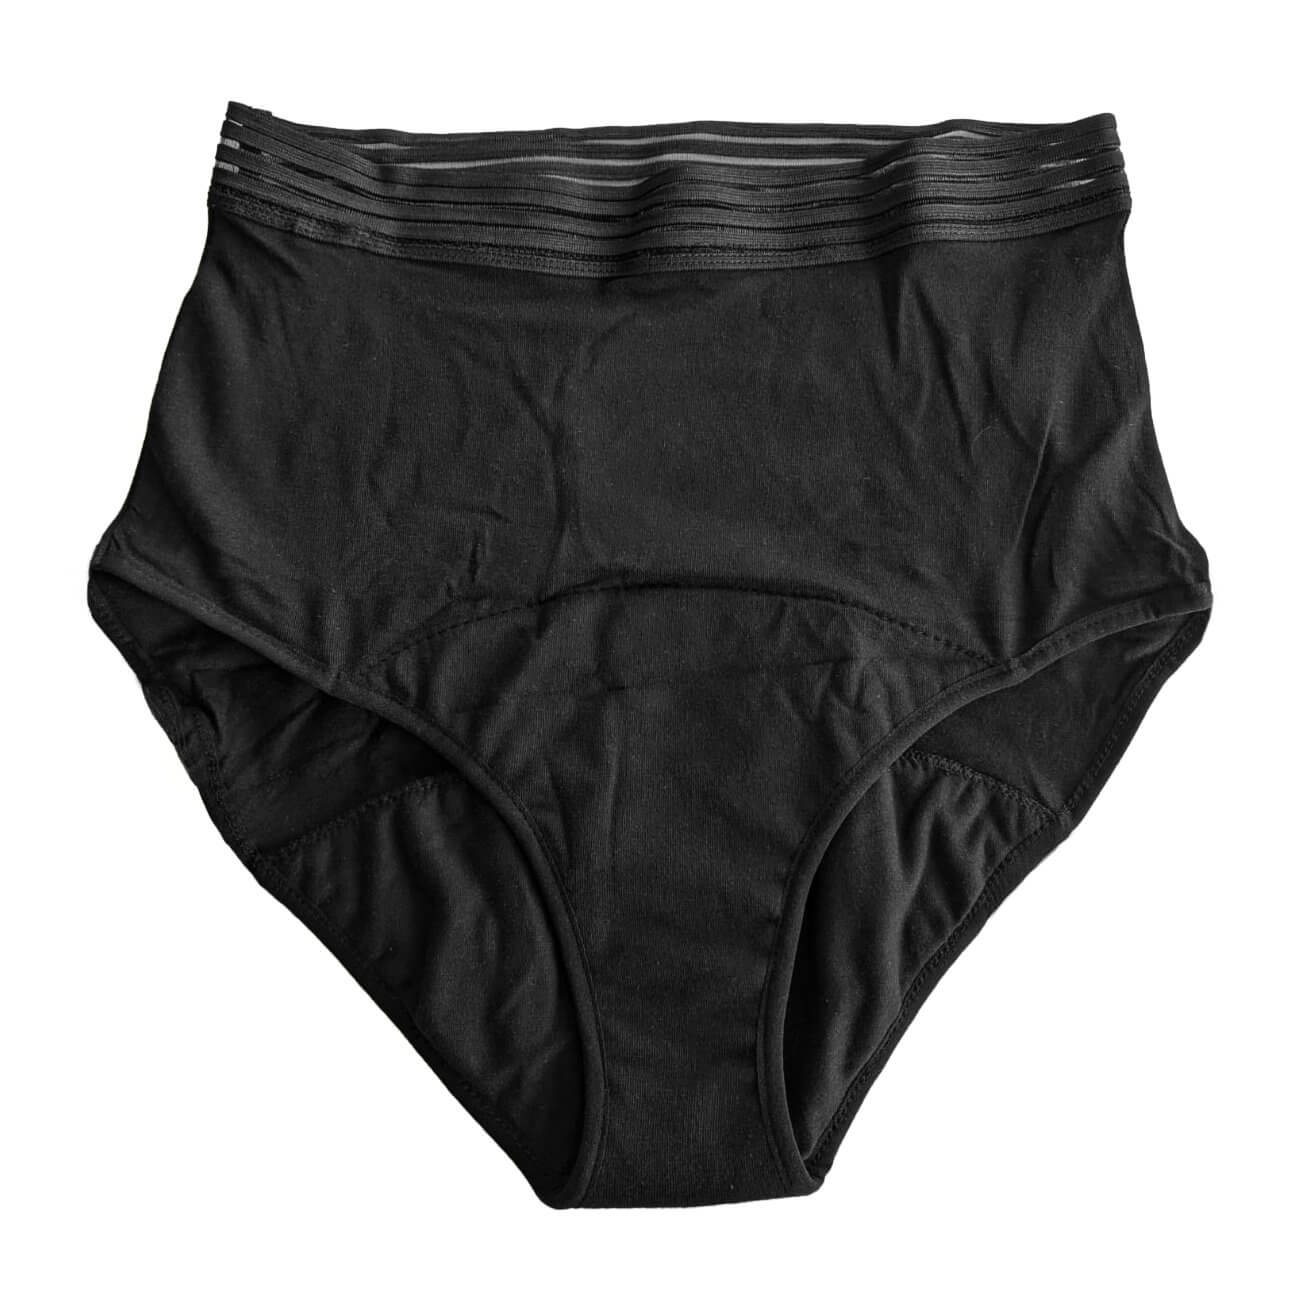 Modal Period Panty For Heavy Flow, Boxer Fit